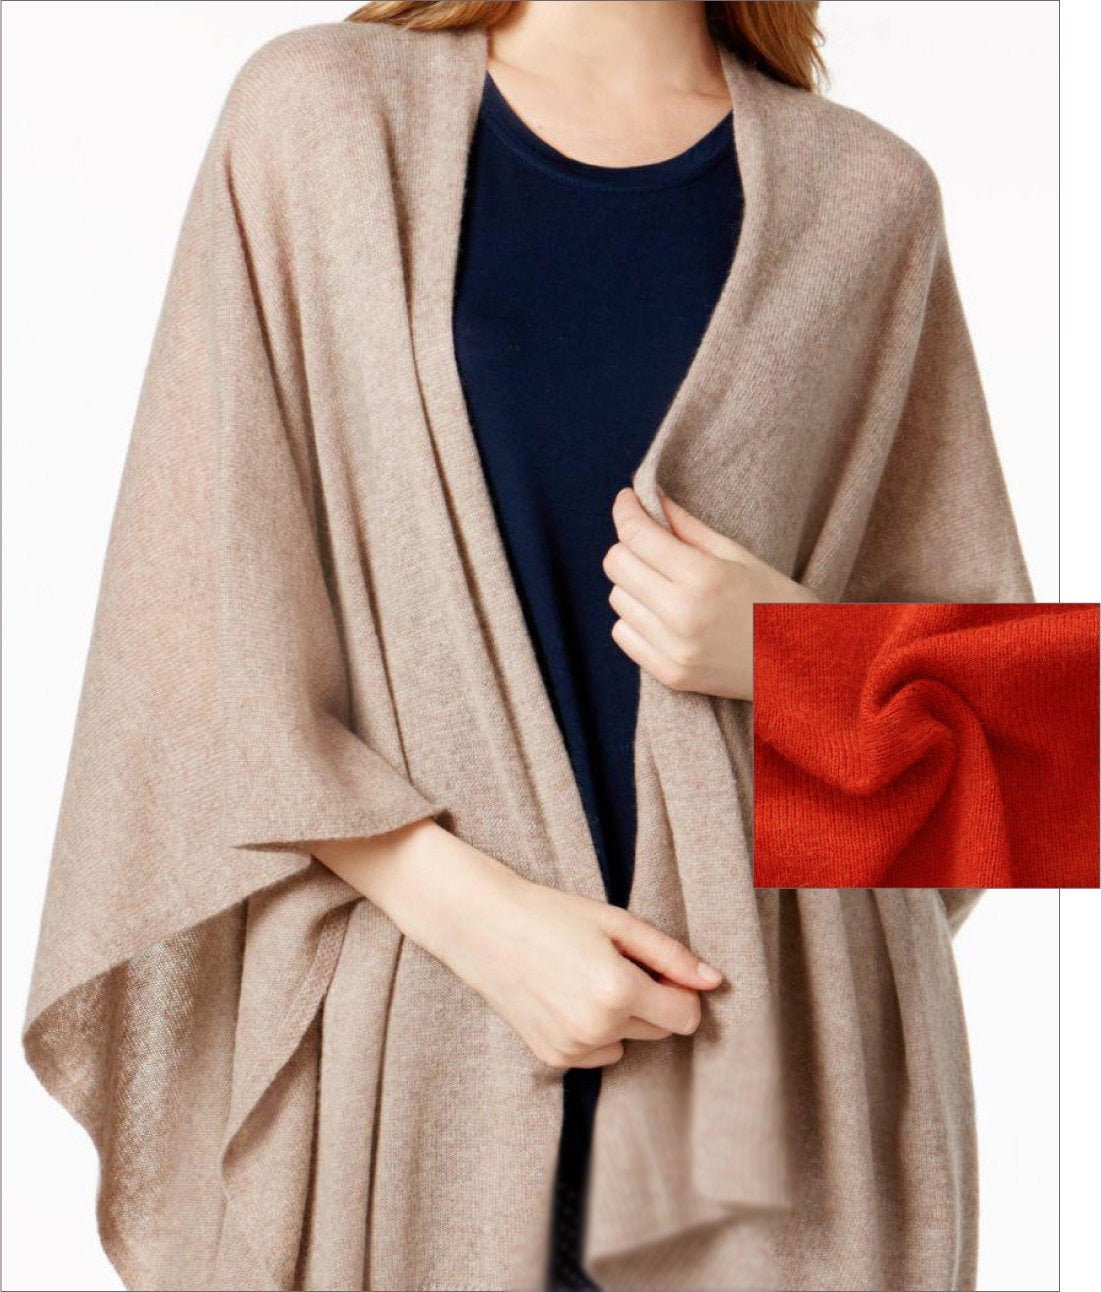 Cashmere-Blend Duster - "Lucia' in Soft Cashmere-Blend